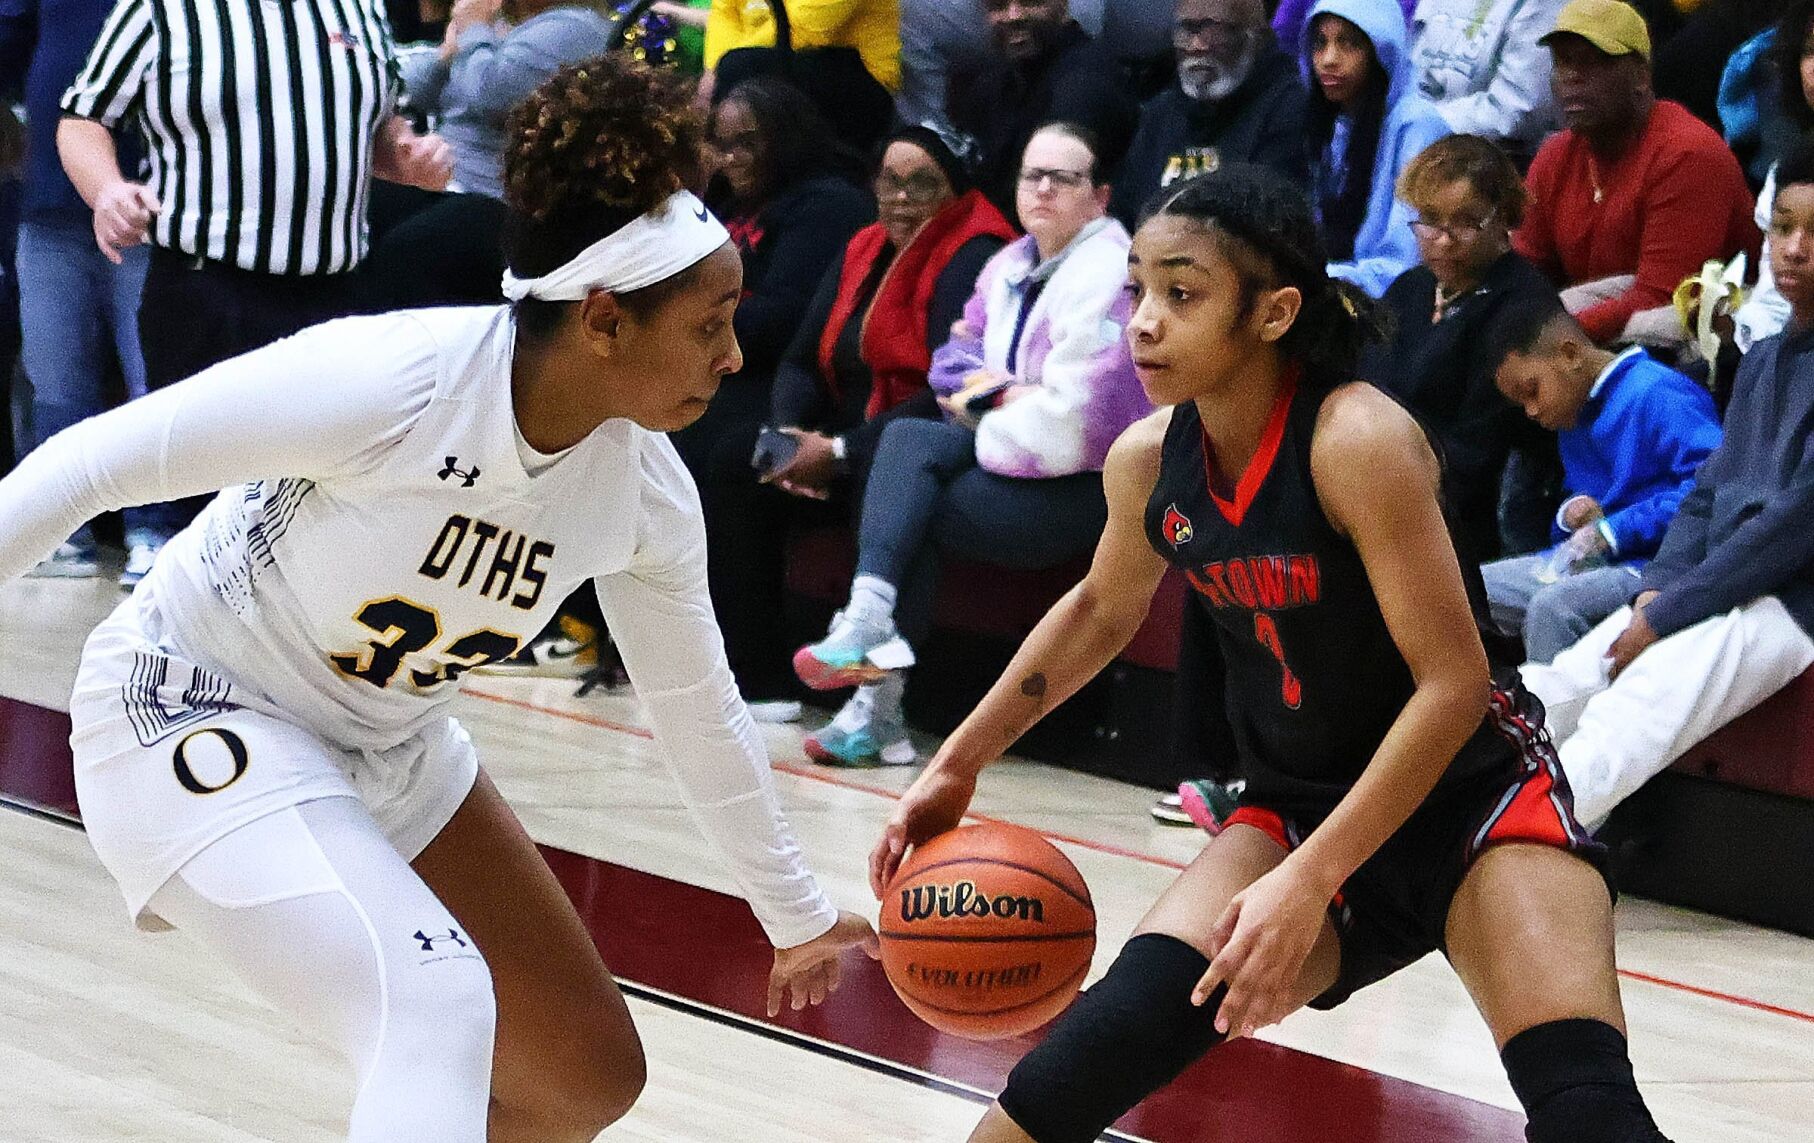 Alton High Girls Basketball Team Makes a Statement by Defeating State Champ O’Fallon